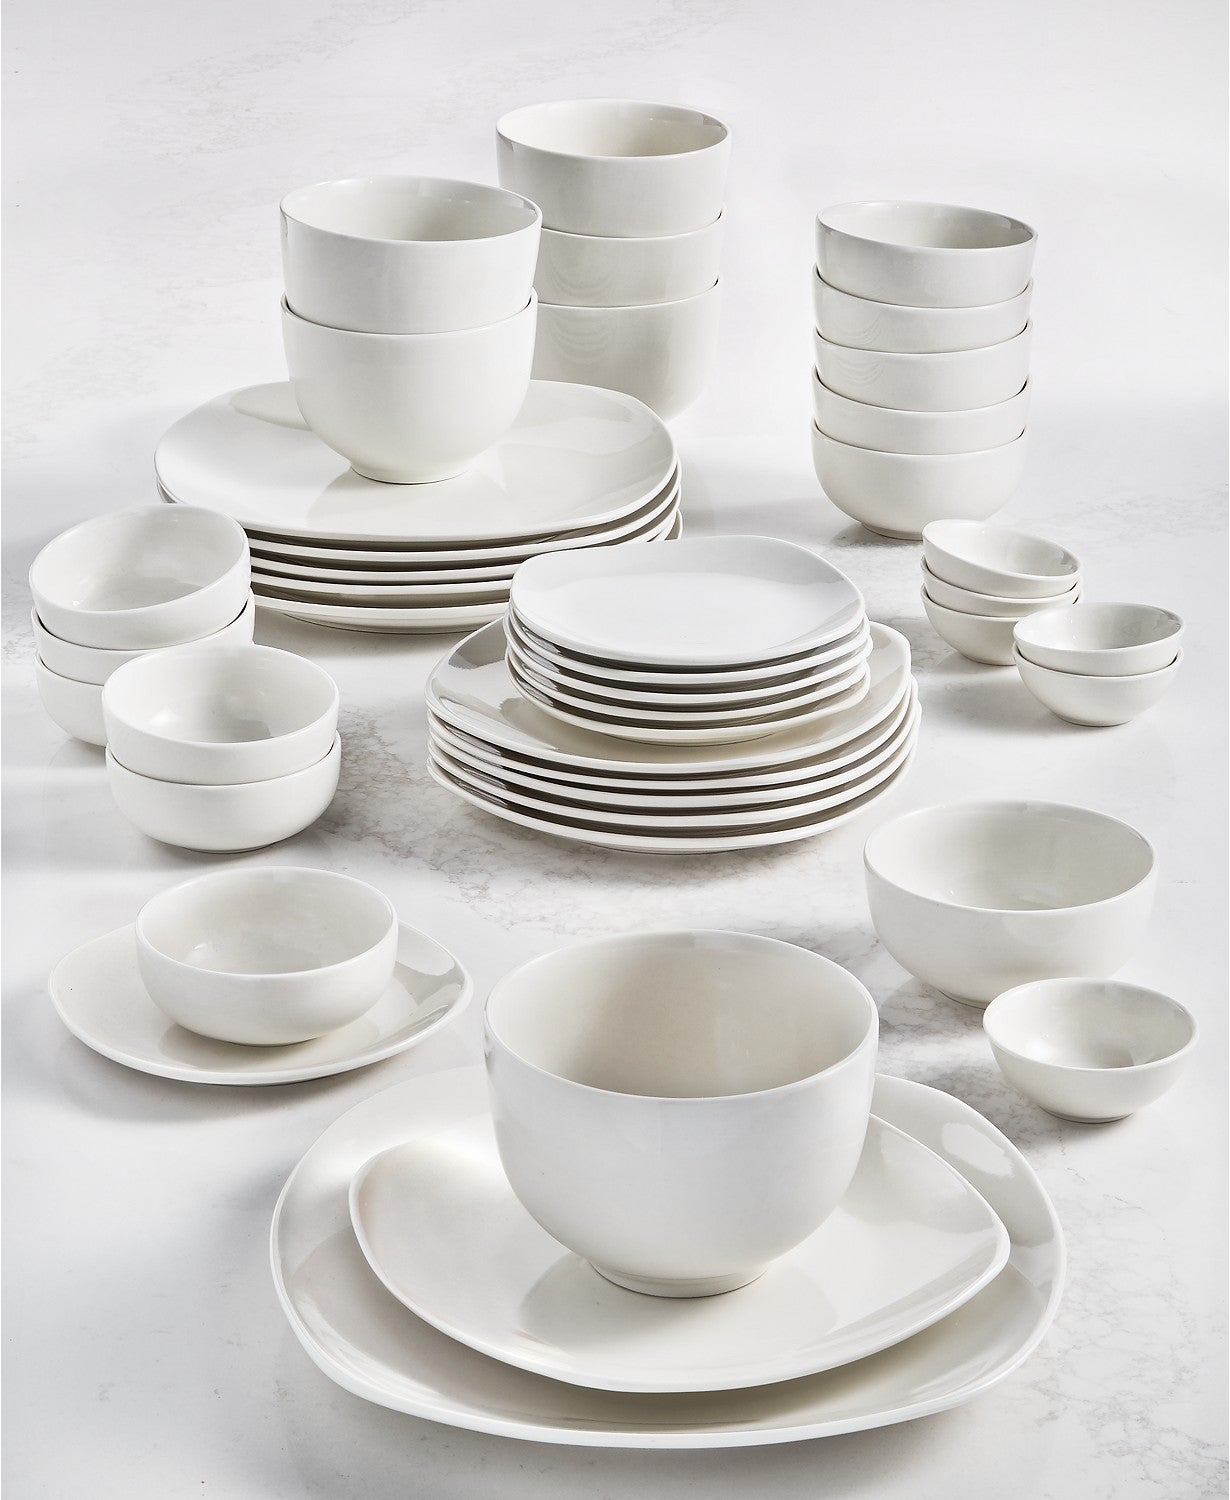 Inspiration By Denmark Soft Square 42 Pc. Dinnerware Set, Service For 6